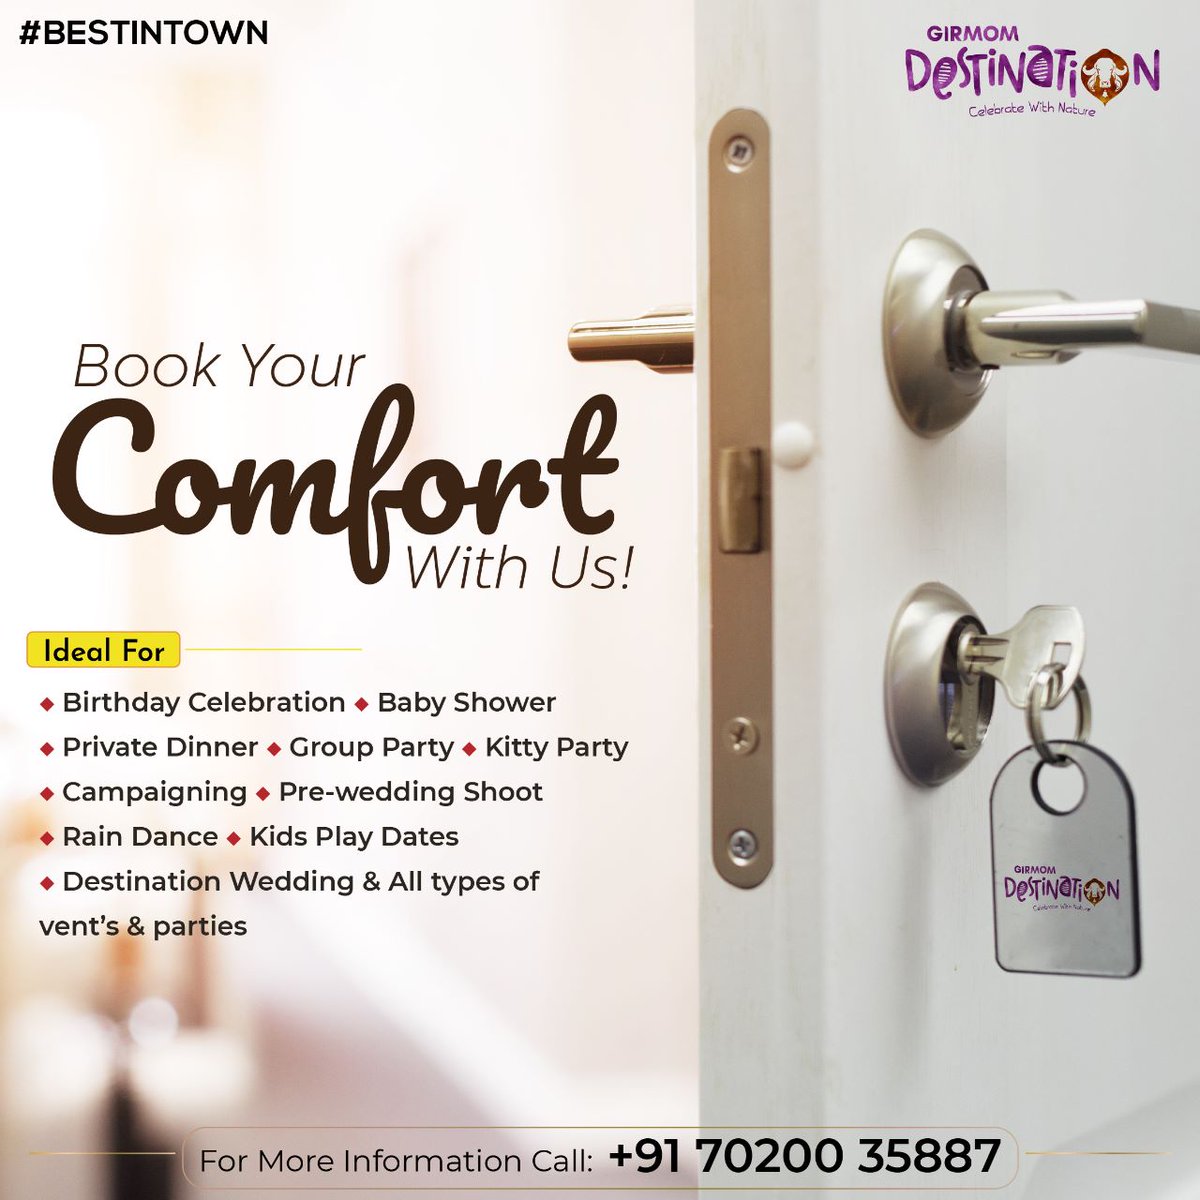 Book Your Comfort With Us.
#girmomdestination #destination #joy #comfort #love #peace #enjoy #vibes #weekend #weekendvibes #lakesideview #celebrationday